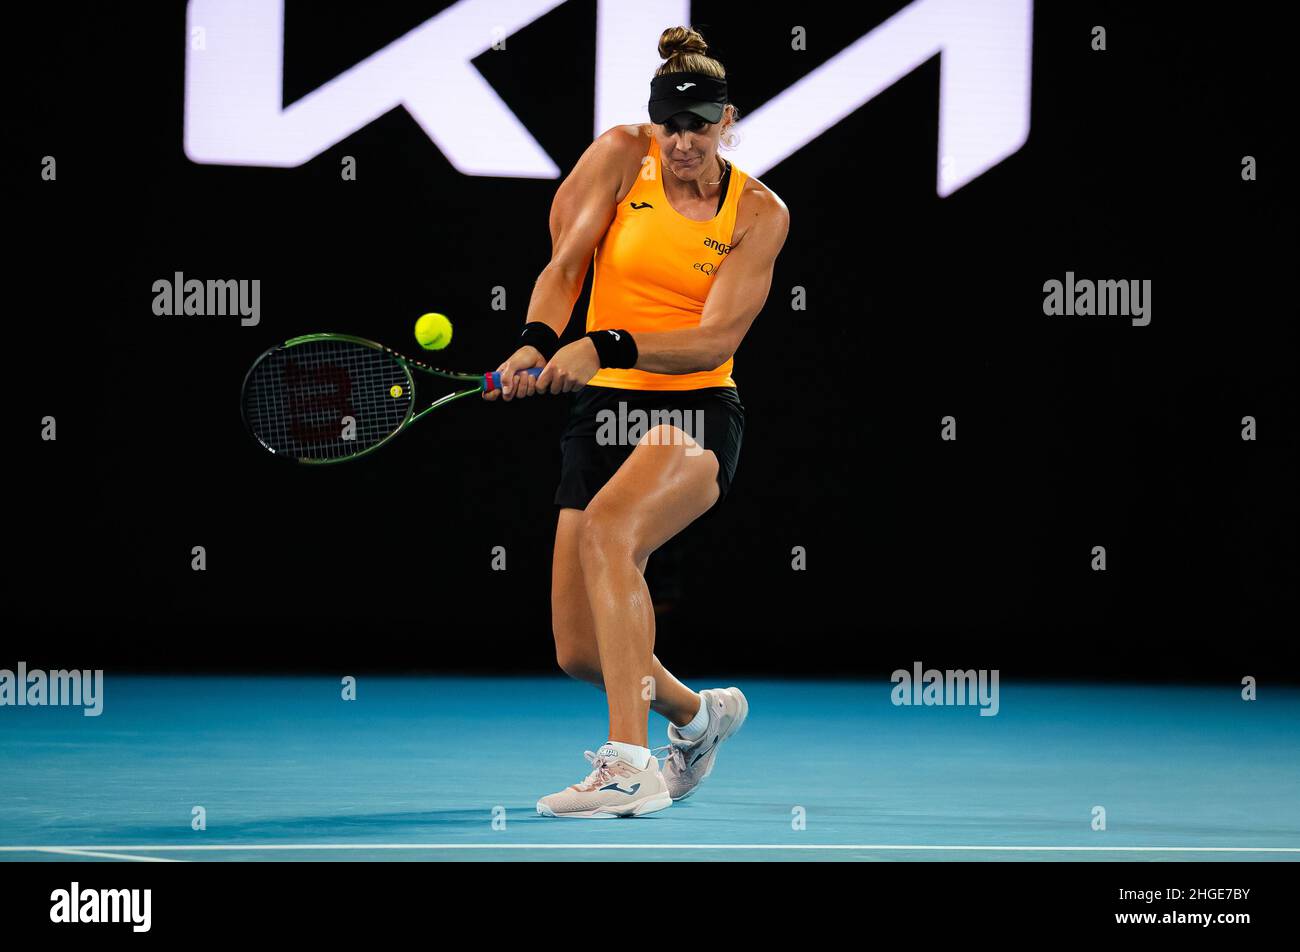 Beatriz Haddad Maia of Brazil in action against Simona Halep of Romania during the second round of the 2022 Australian Open, WTA Grand Slam tennis tournament on January 20, 2022 at Melbourne